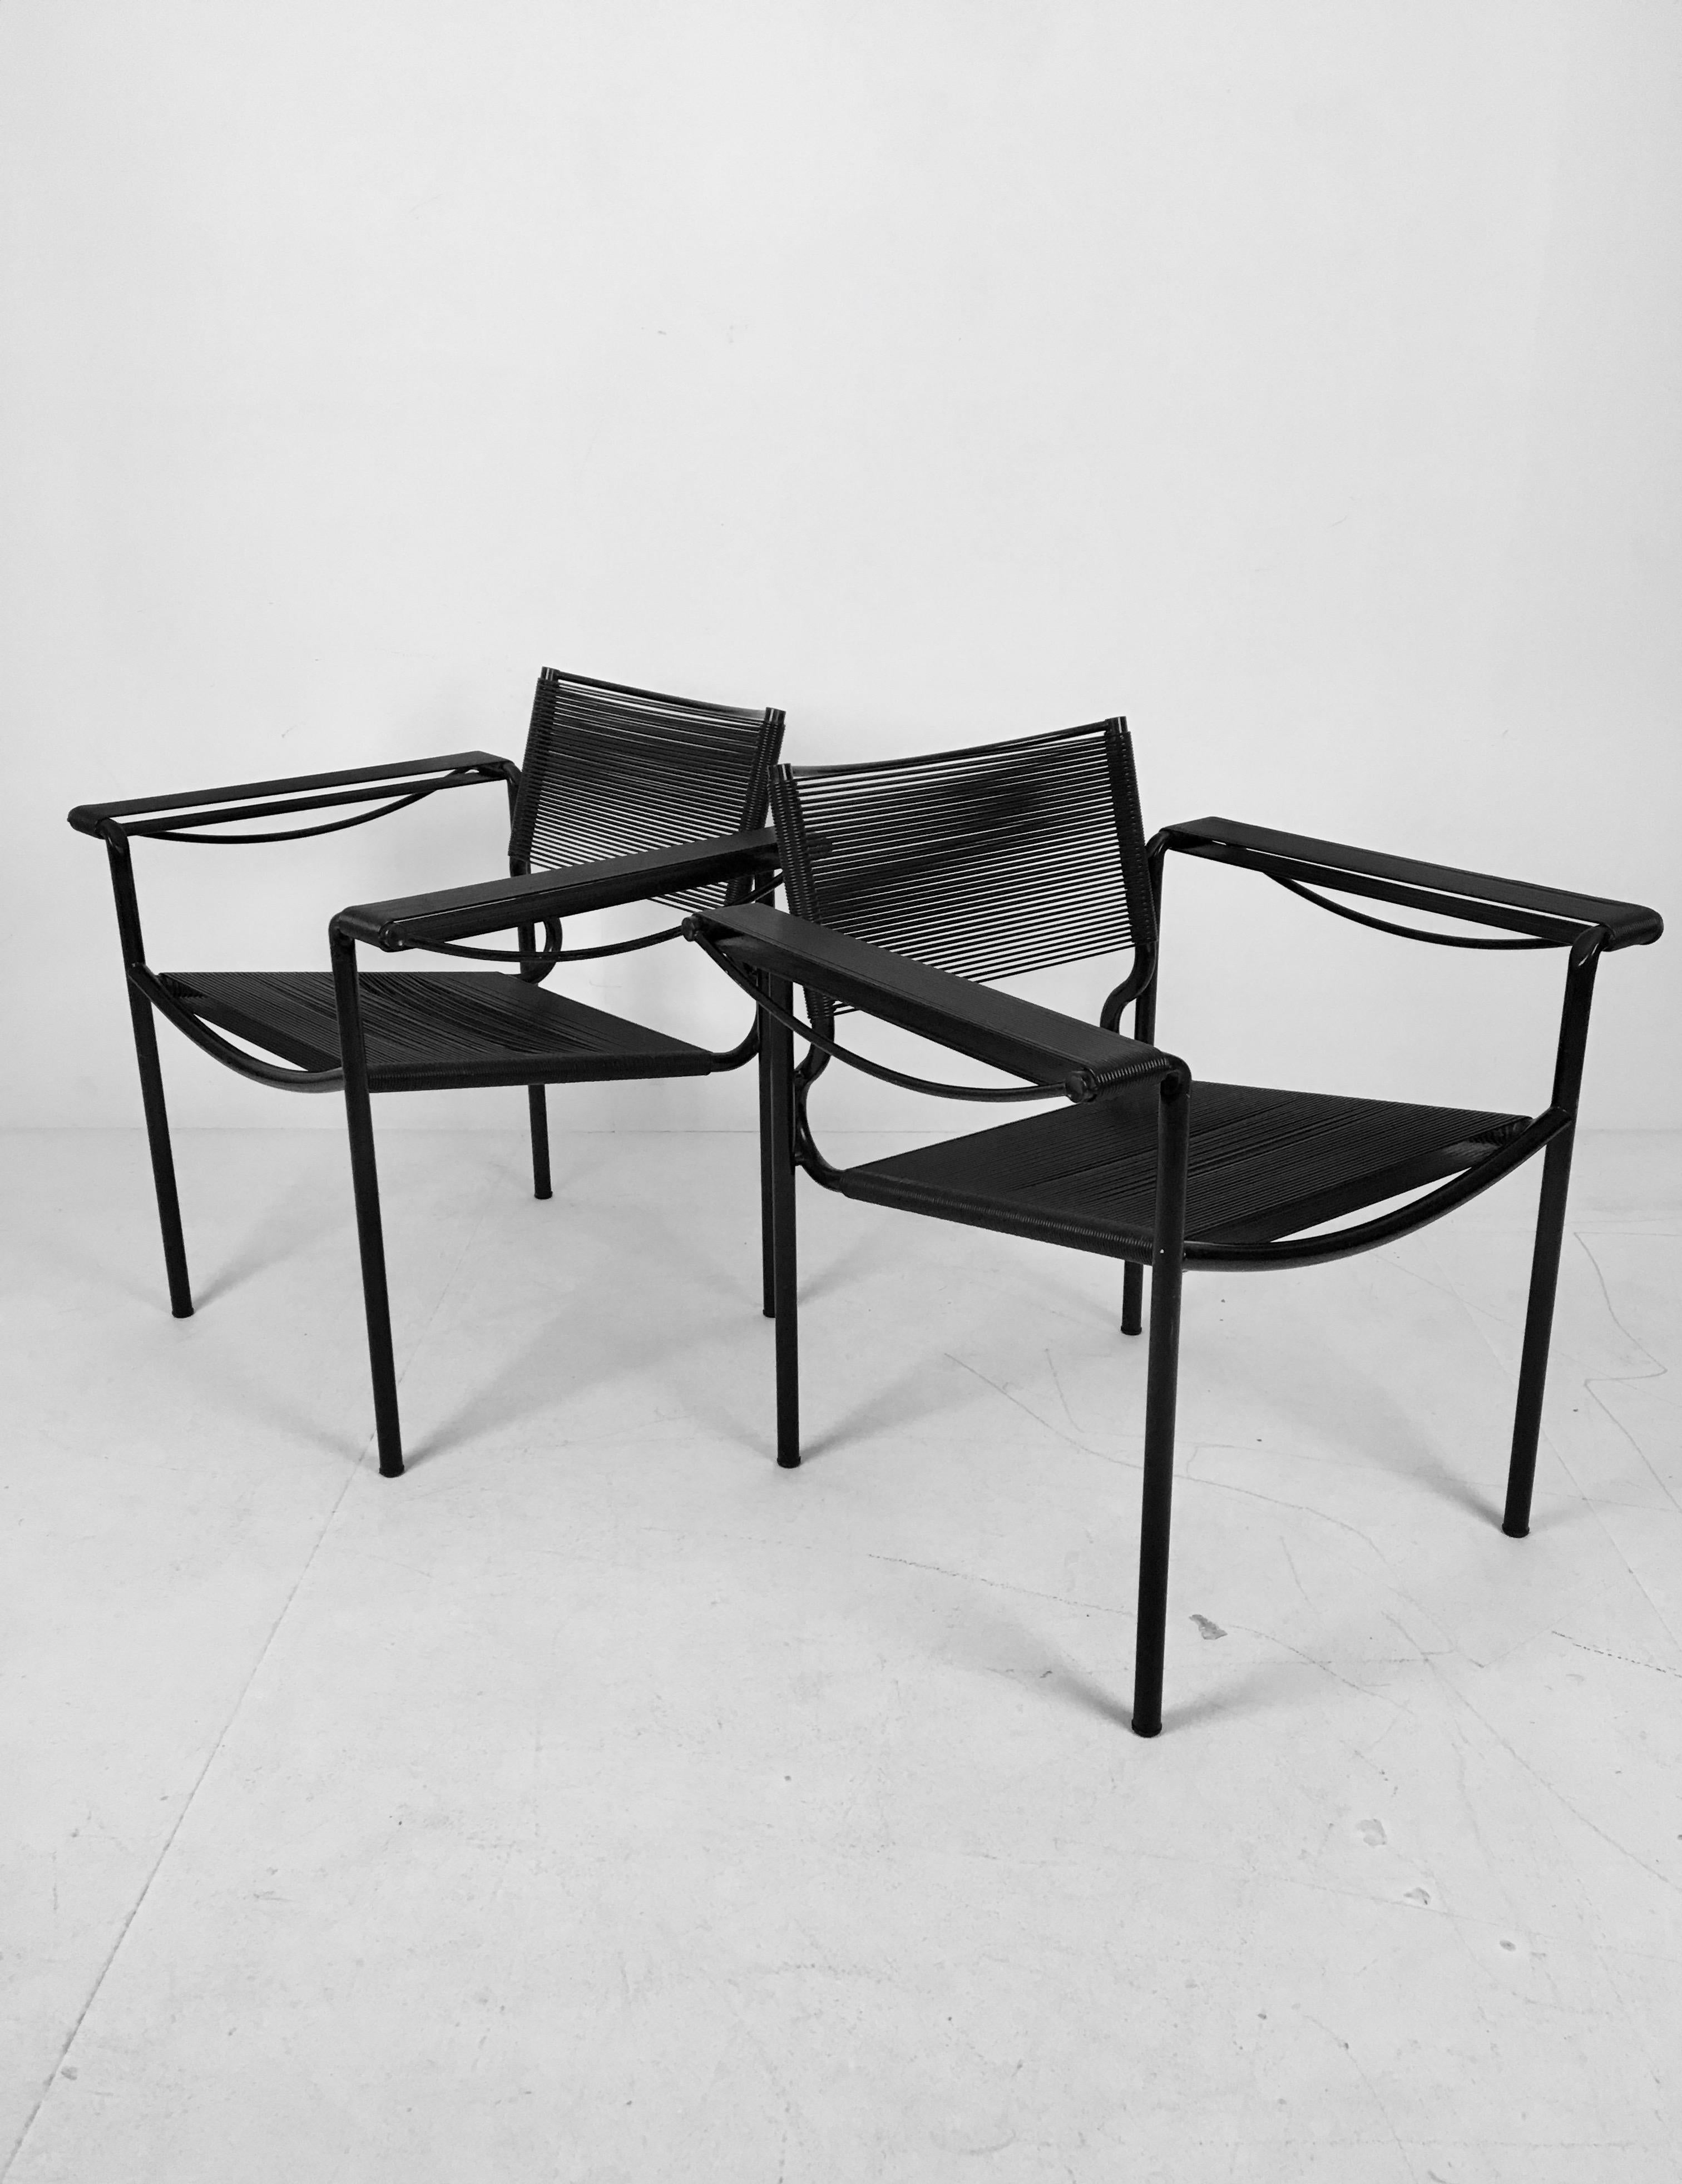 Rare pair of spaghetti chairs designed by Belotti for Alias, Italy in the 1980s with PVC 'spaghetti' corded seat, back and arm rests on tubular steel frame. Iconic Postmodern Italian design in great condition.